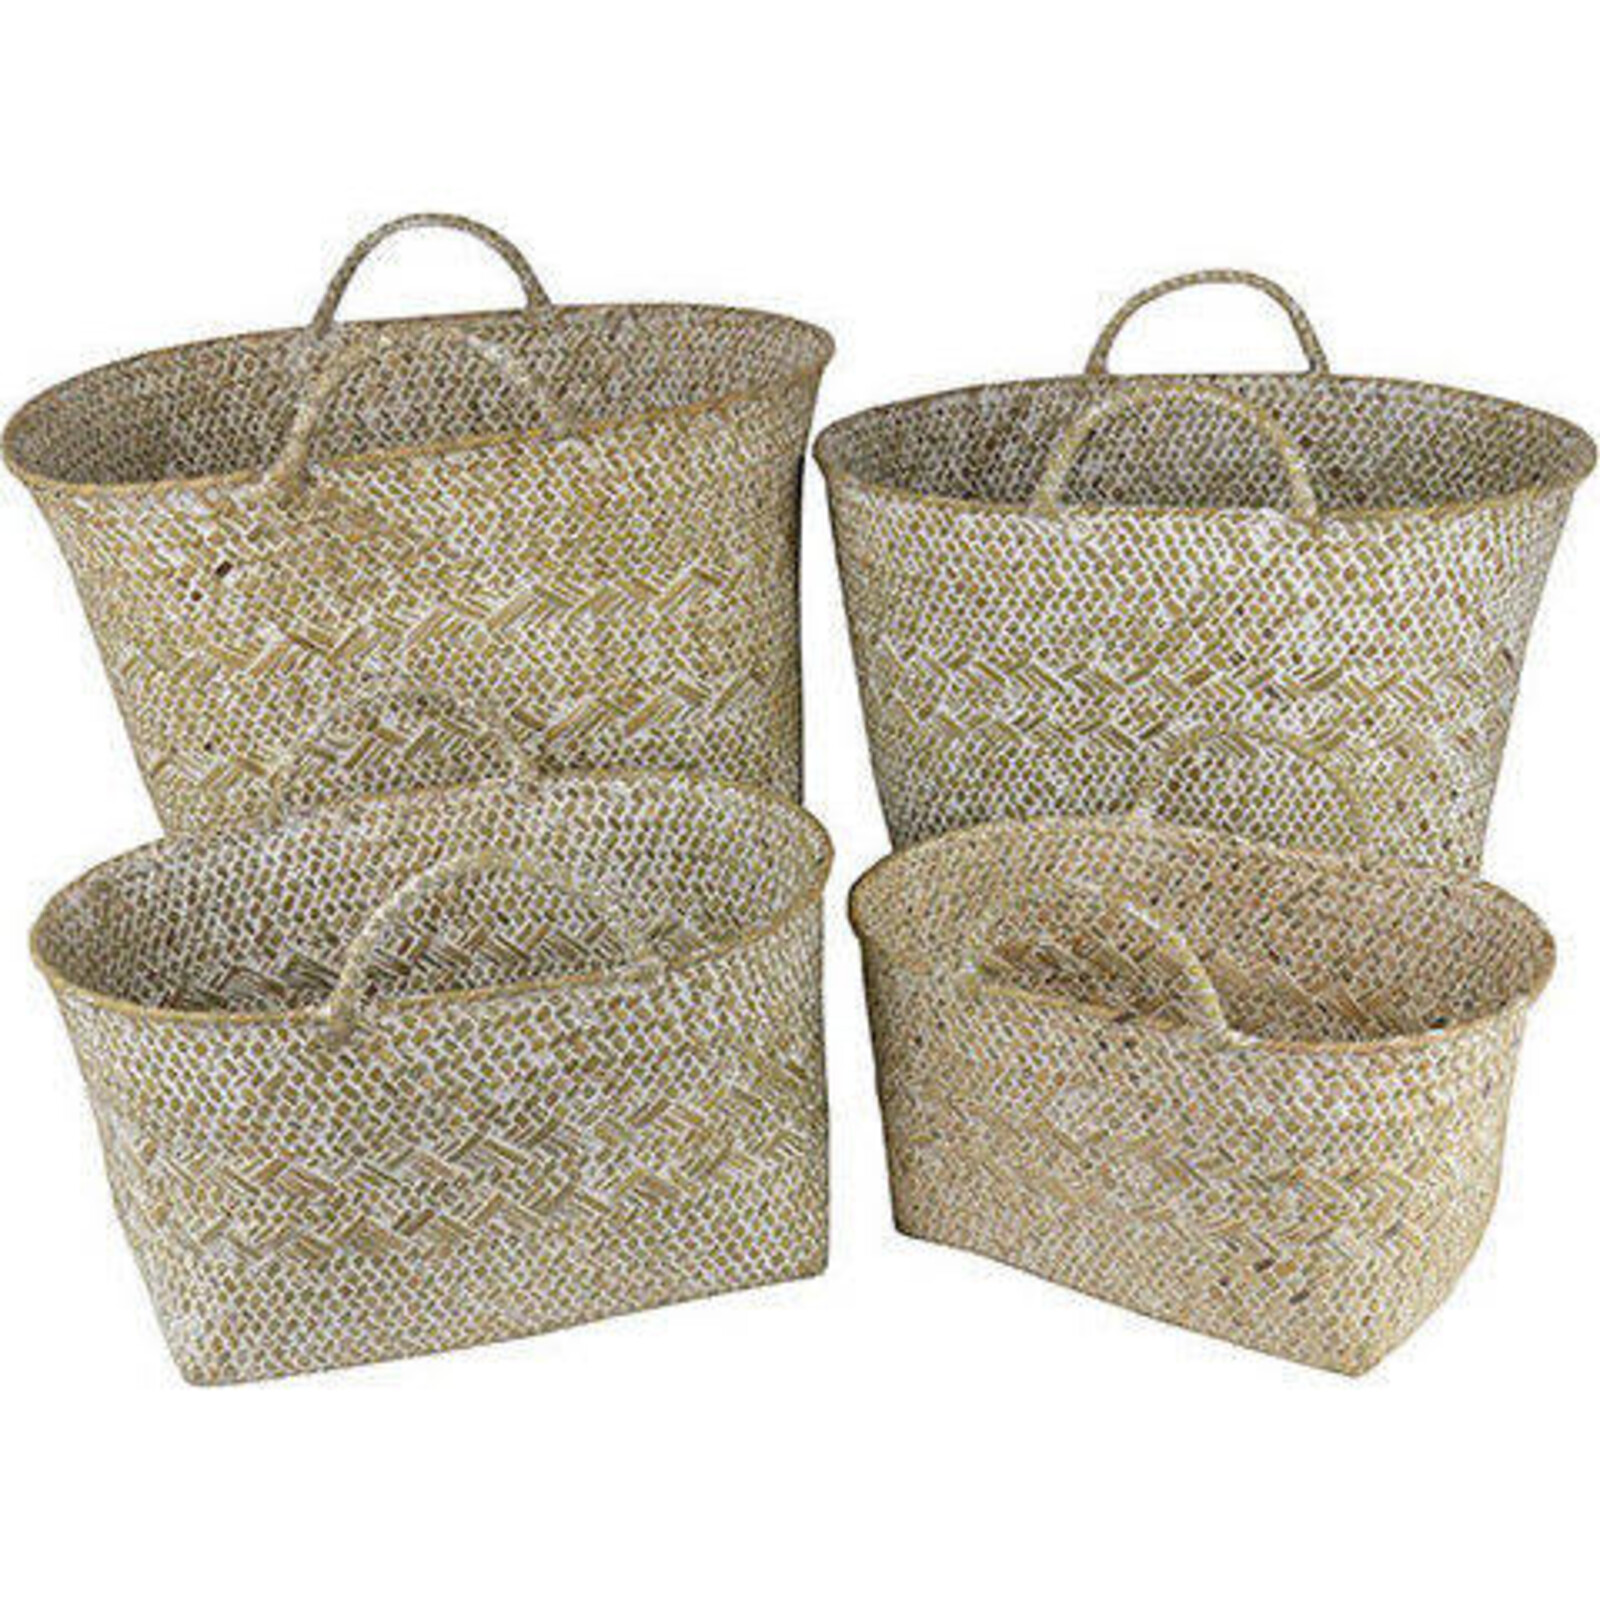 Woven Eve Basket N/wash S/4